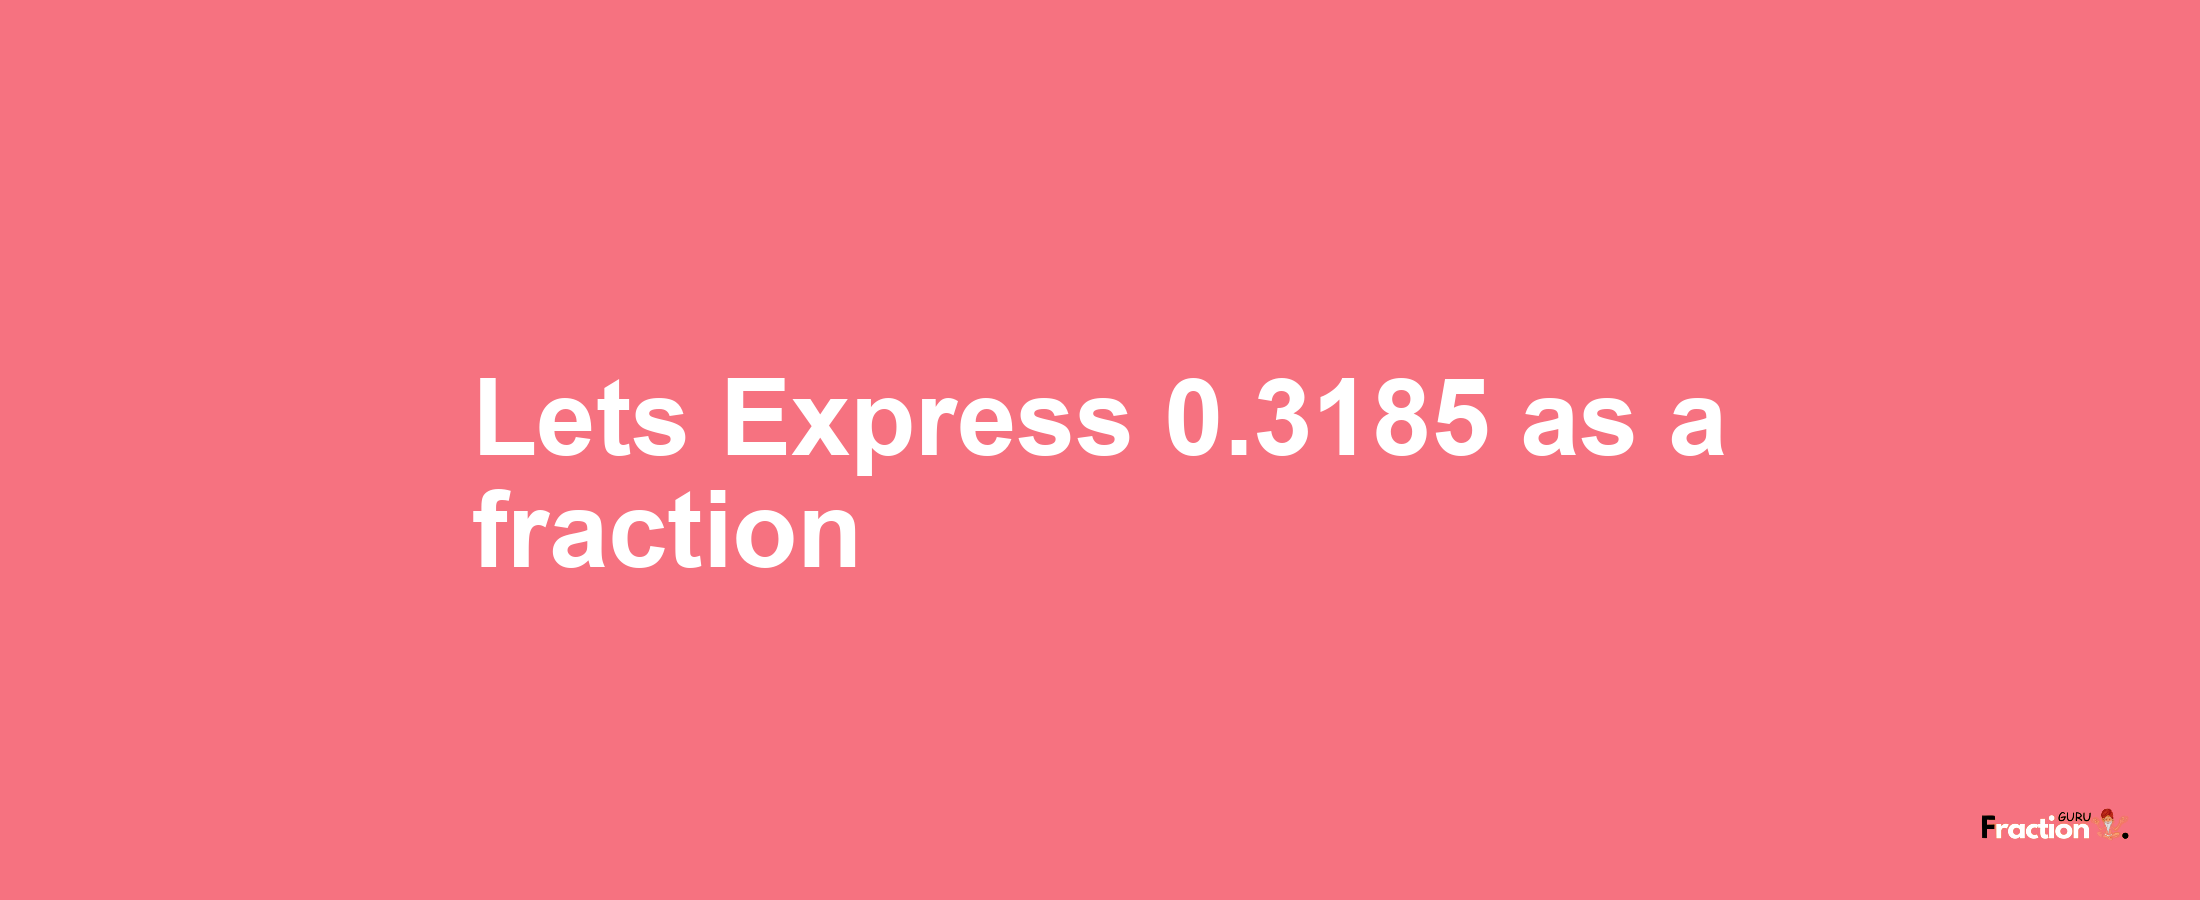 Lets Express 0.3185 as afraction